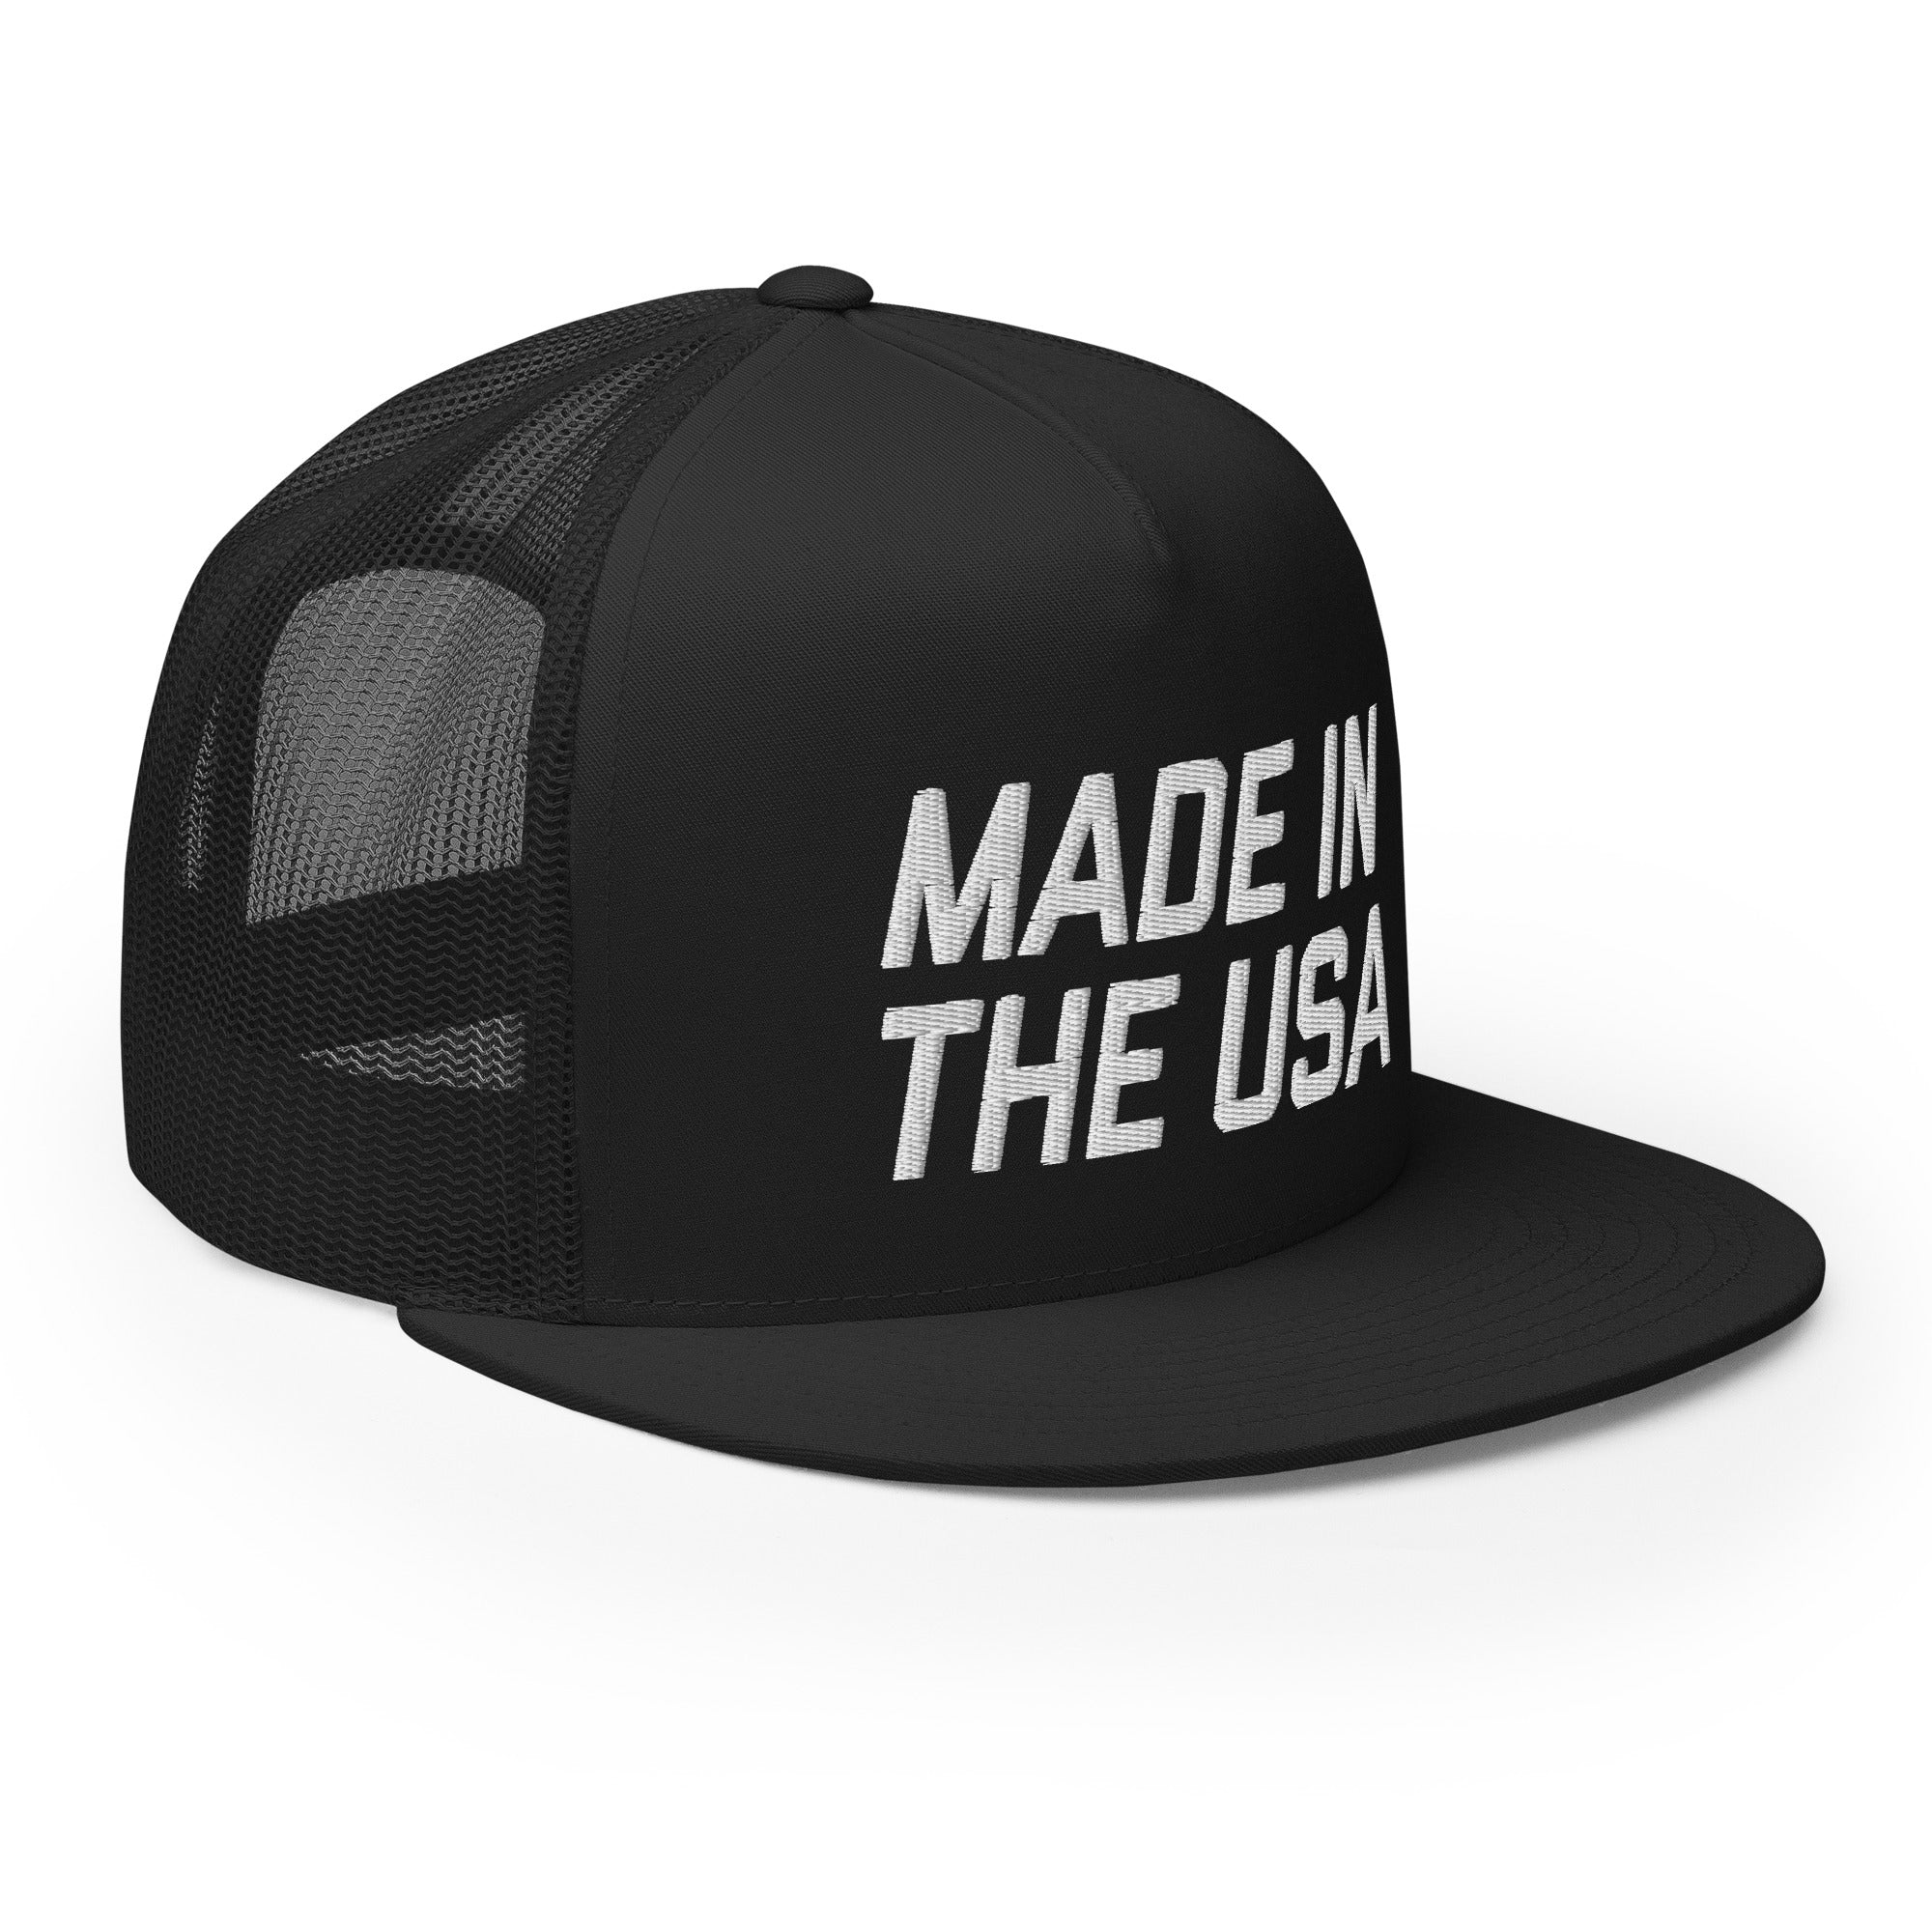 Made In the USA - Flat Bill Trucker Hat